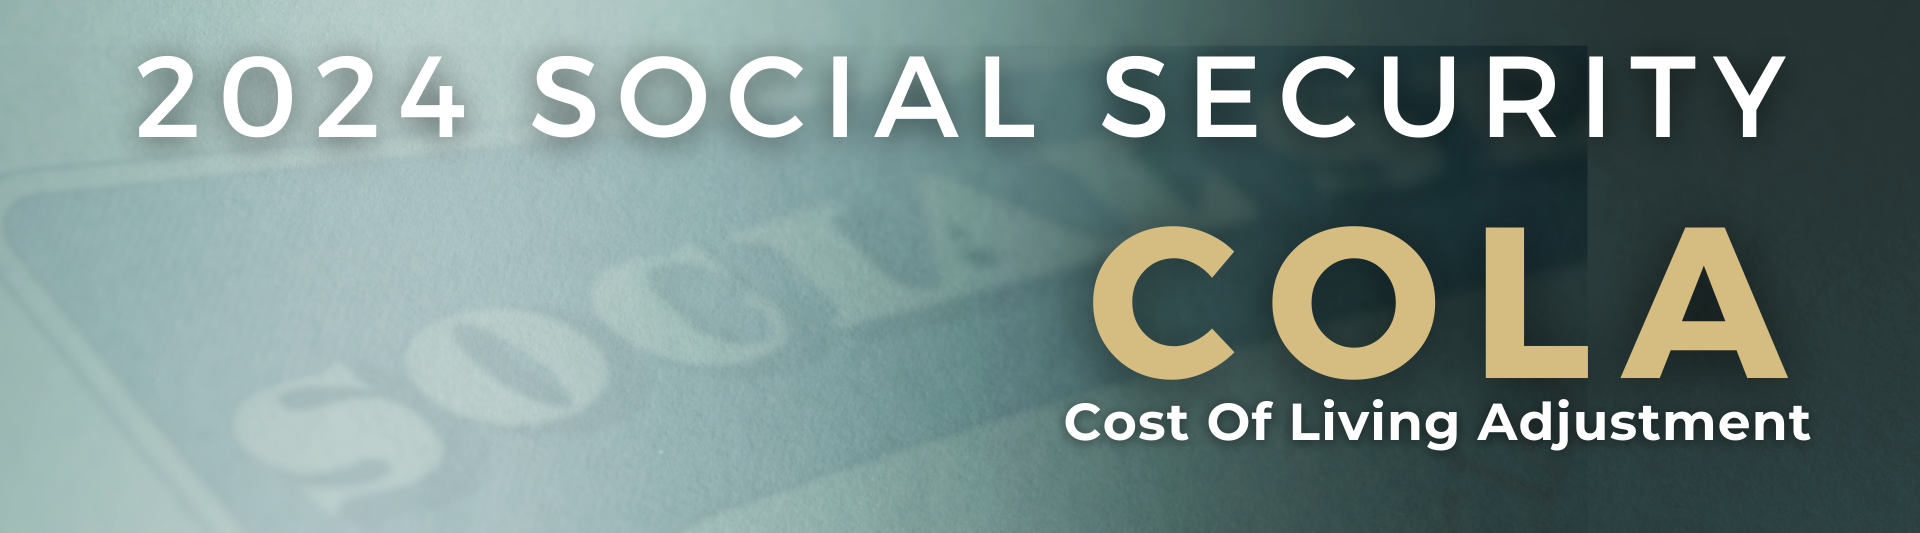 Social Security COLA 2024 Have You Received Your First Increased Check